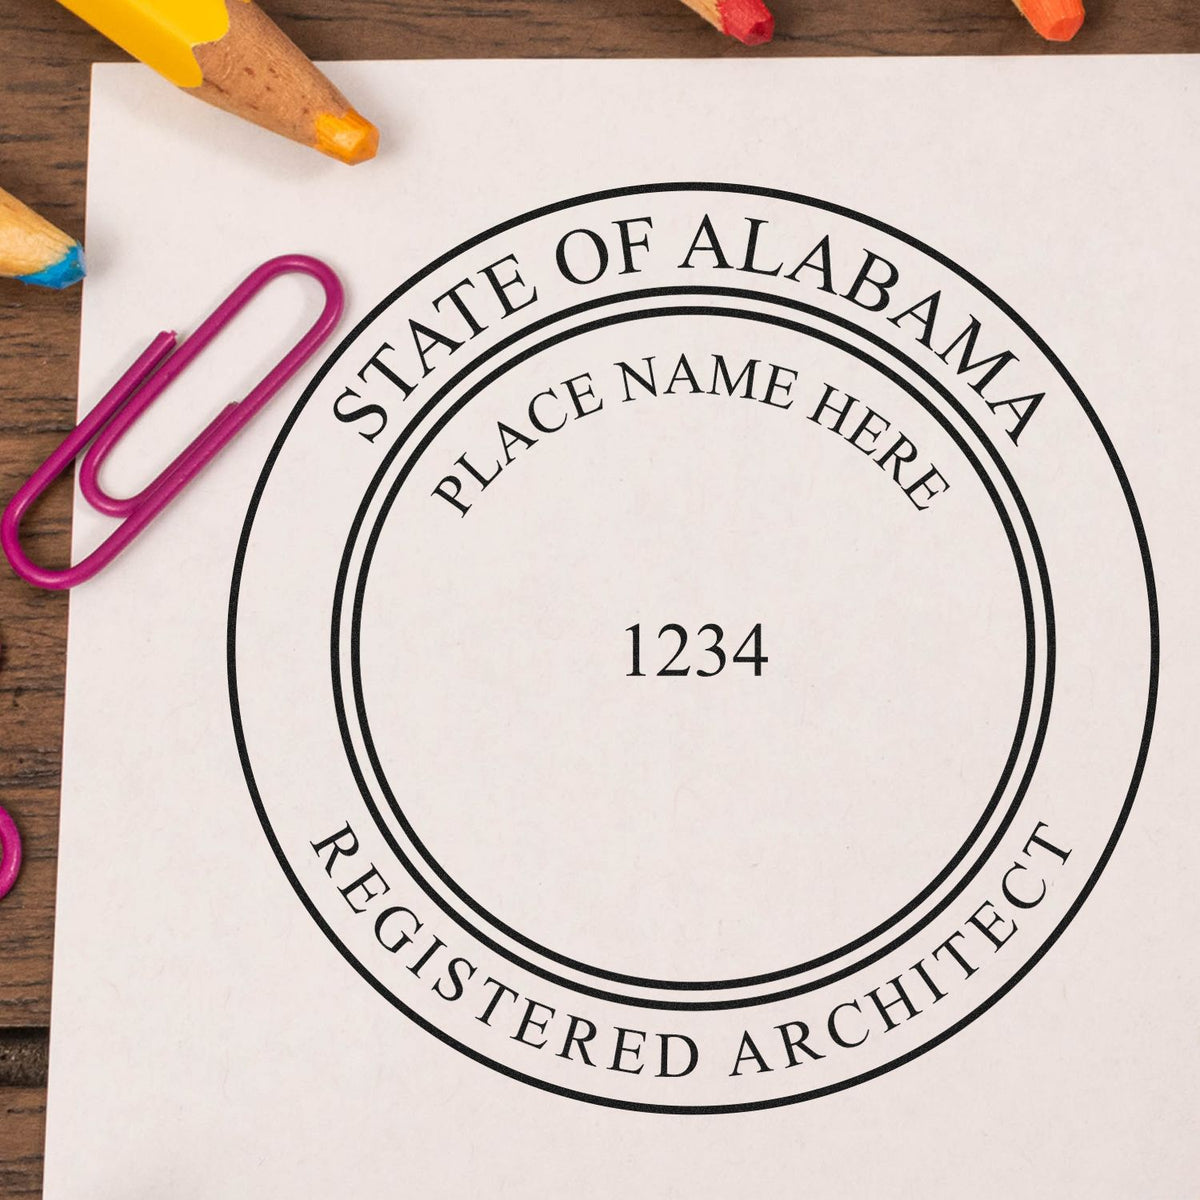 Slim Pre-Inked Alabama Architect Seal Stamp in use photo showing a stamped imprint of the Slim Pre-Inked Alabama Architect Seal Stamp